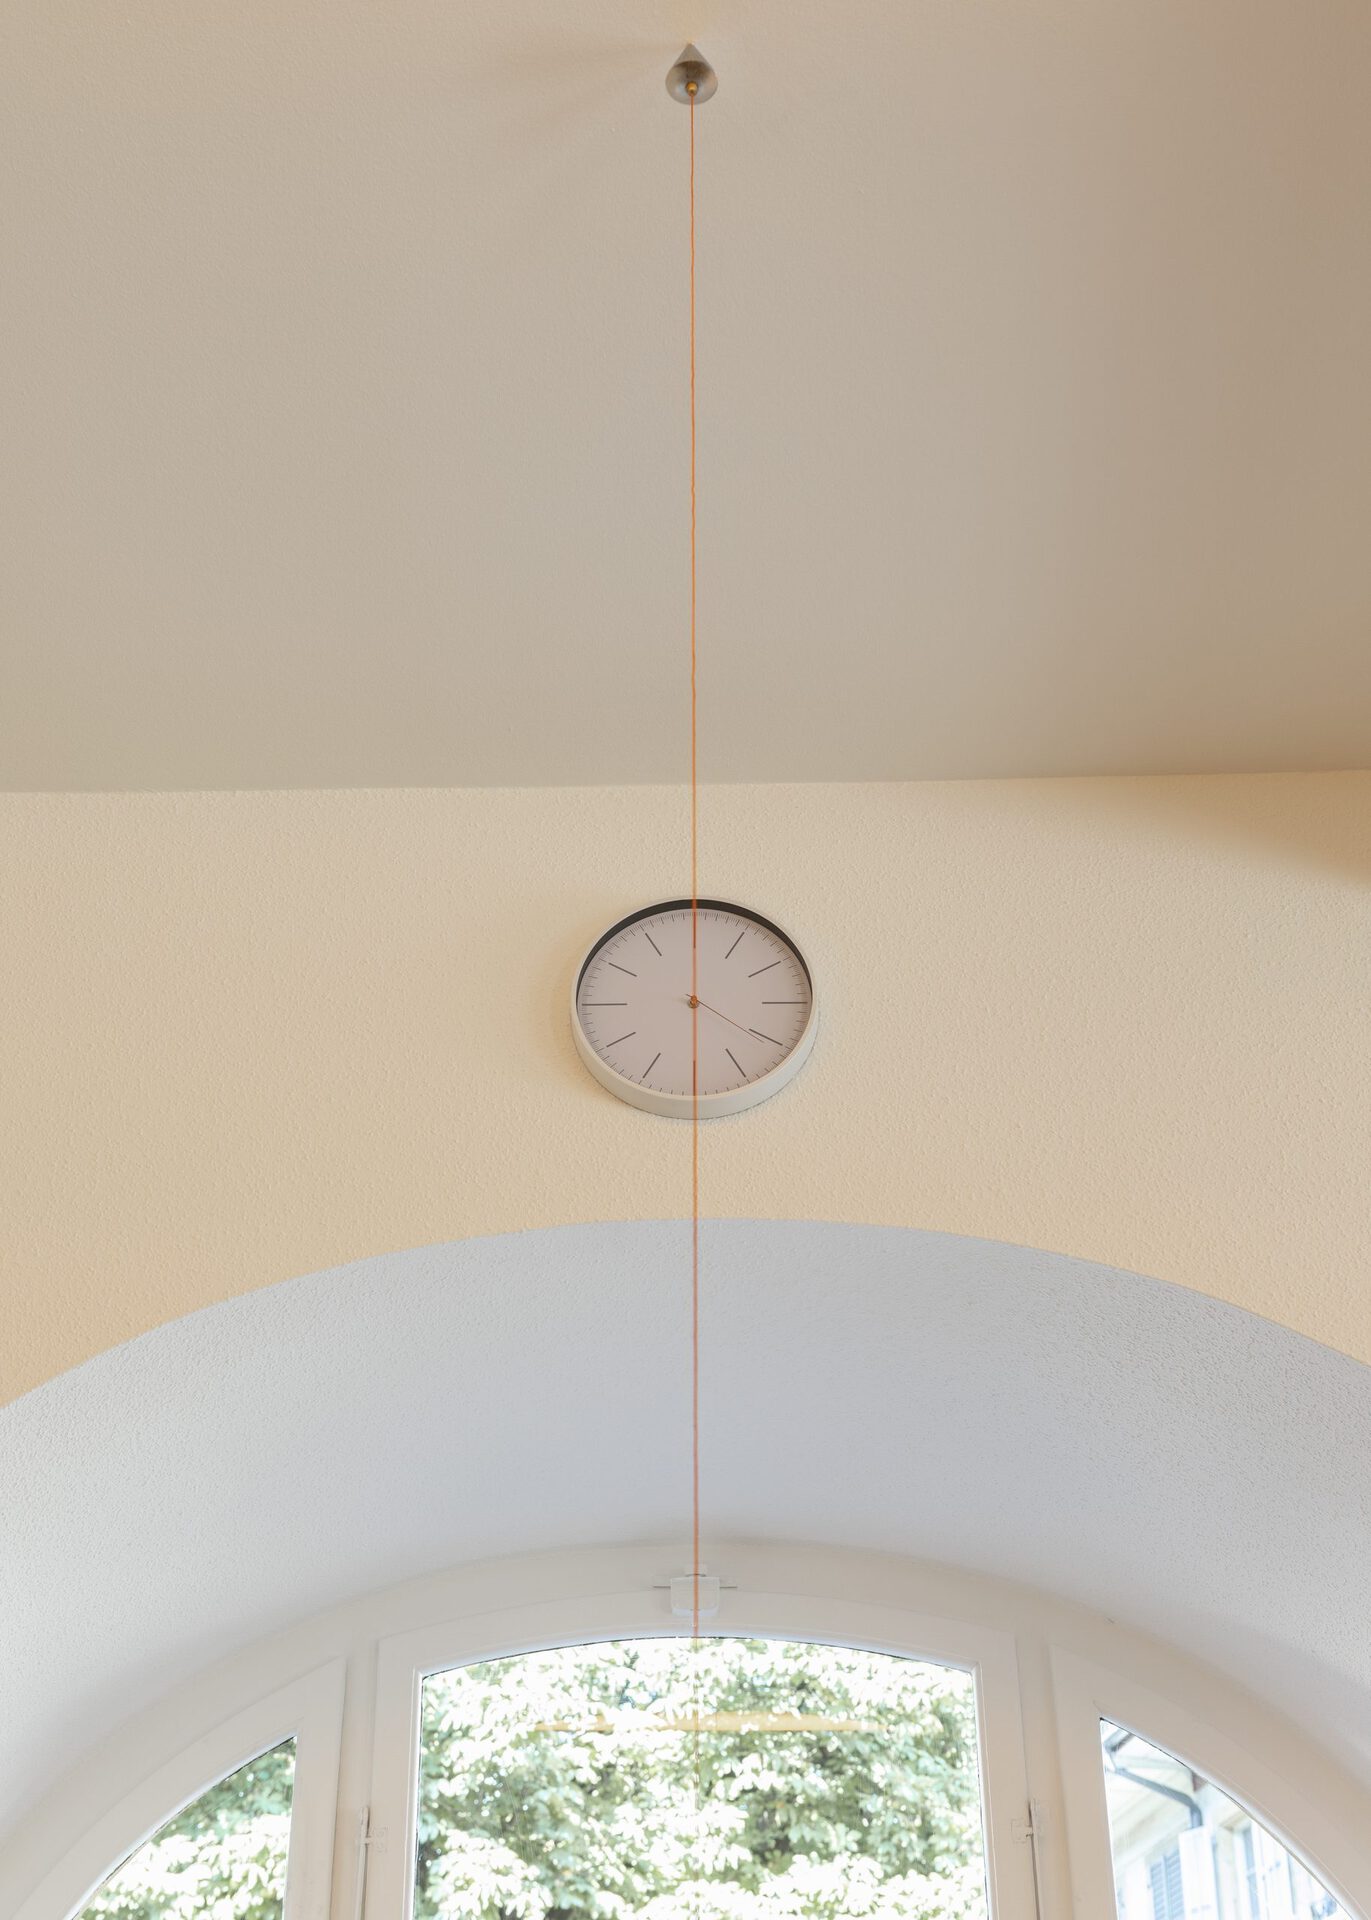 Installation views of the exhibition "Seemingly Incurable Sensation of Temporal Ambiguity" (2021) at the KRONE COURONNE / Jodok Wehrli, Close Enough, 2021. Photo: © Michal Florence Schorro.